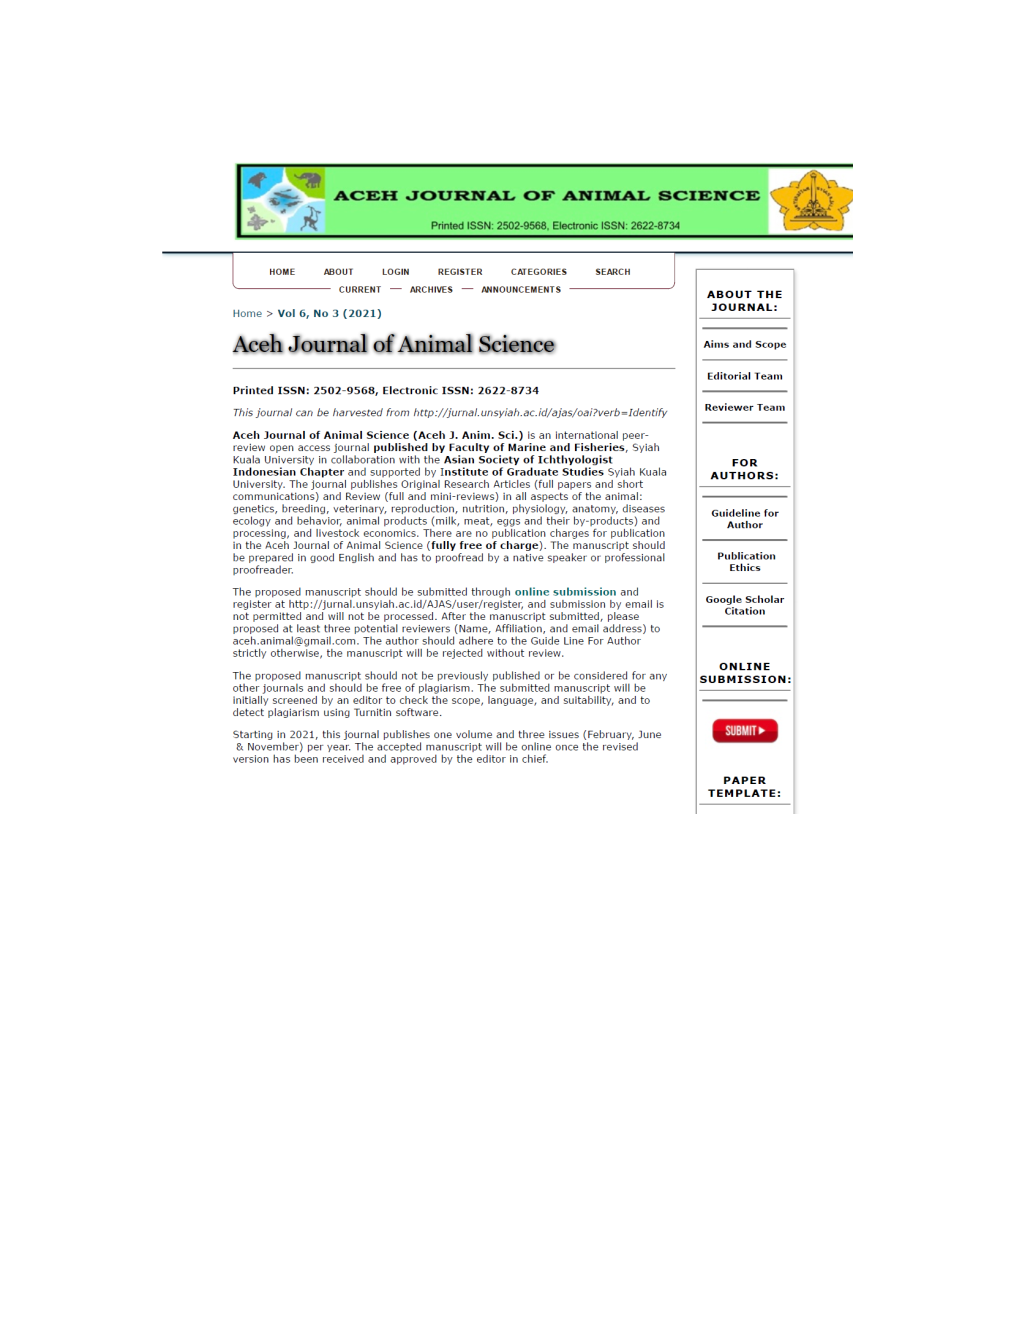 Aceh Journal of Animal Science